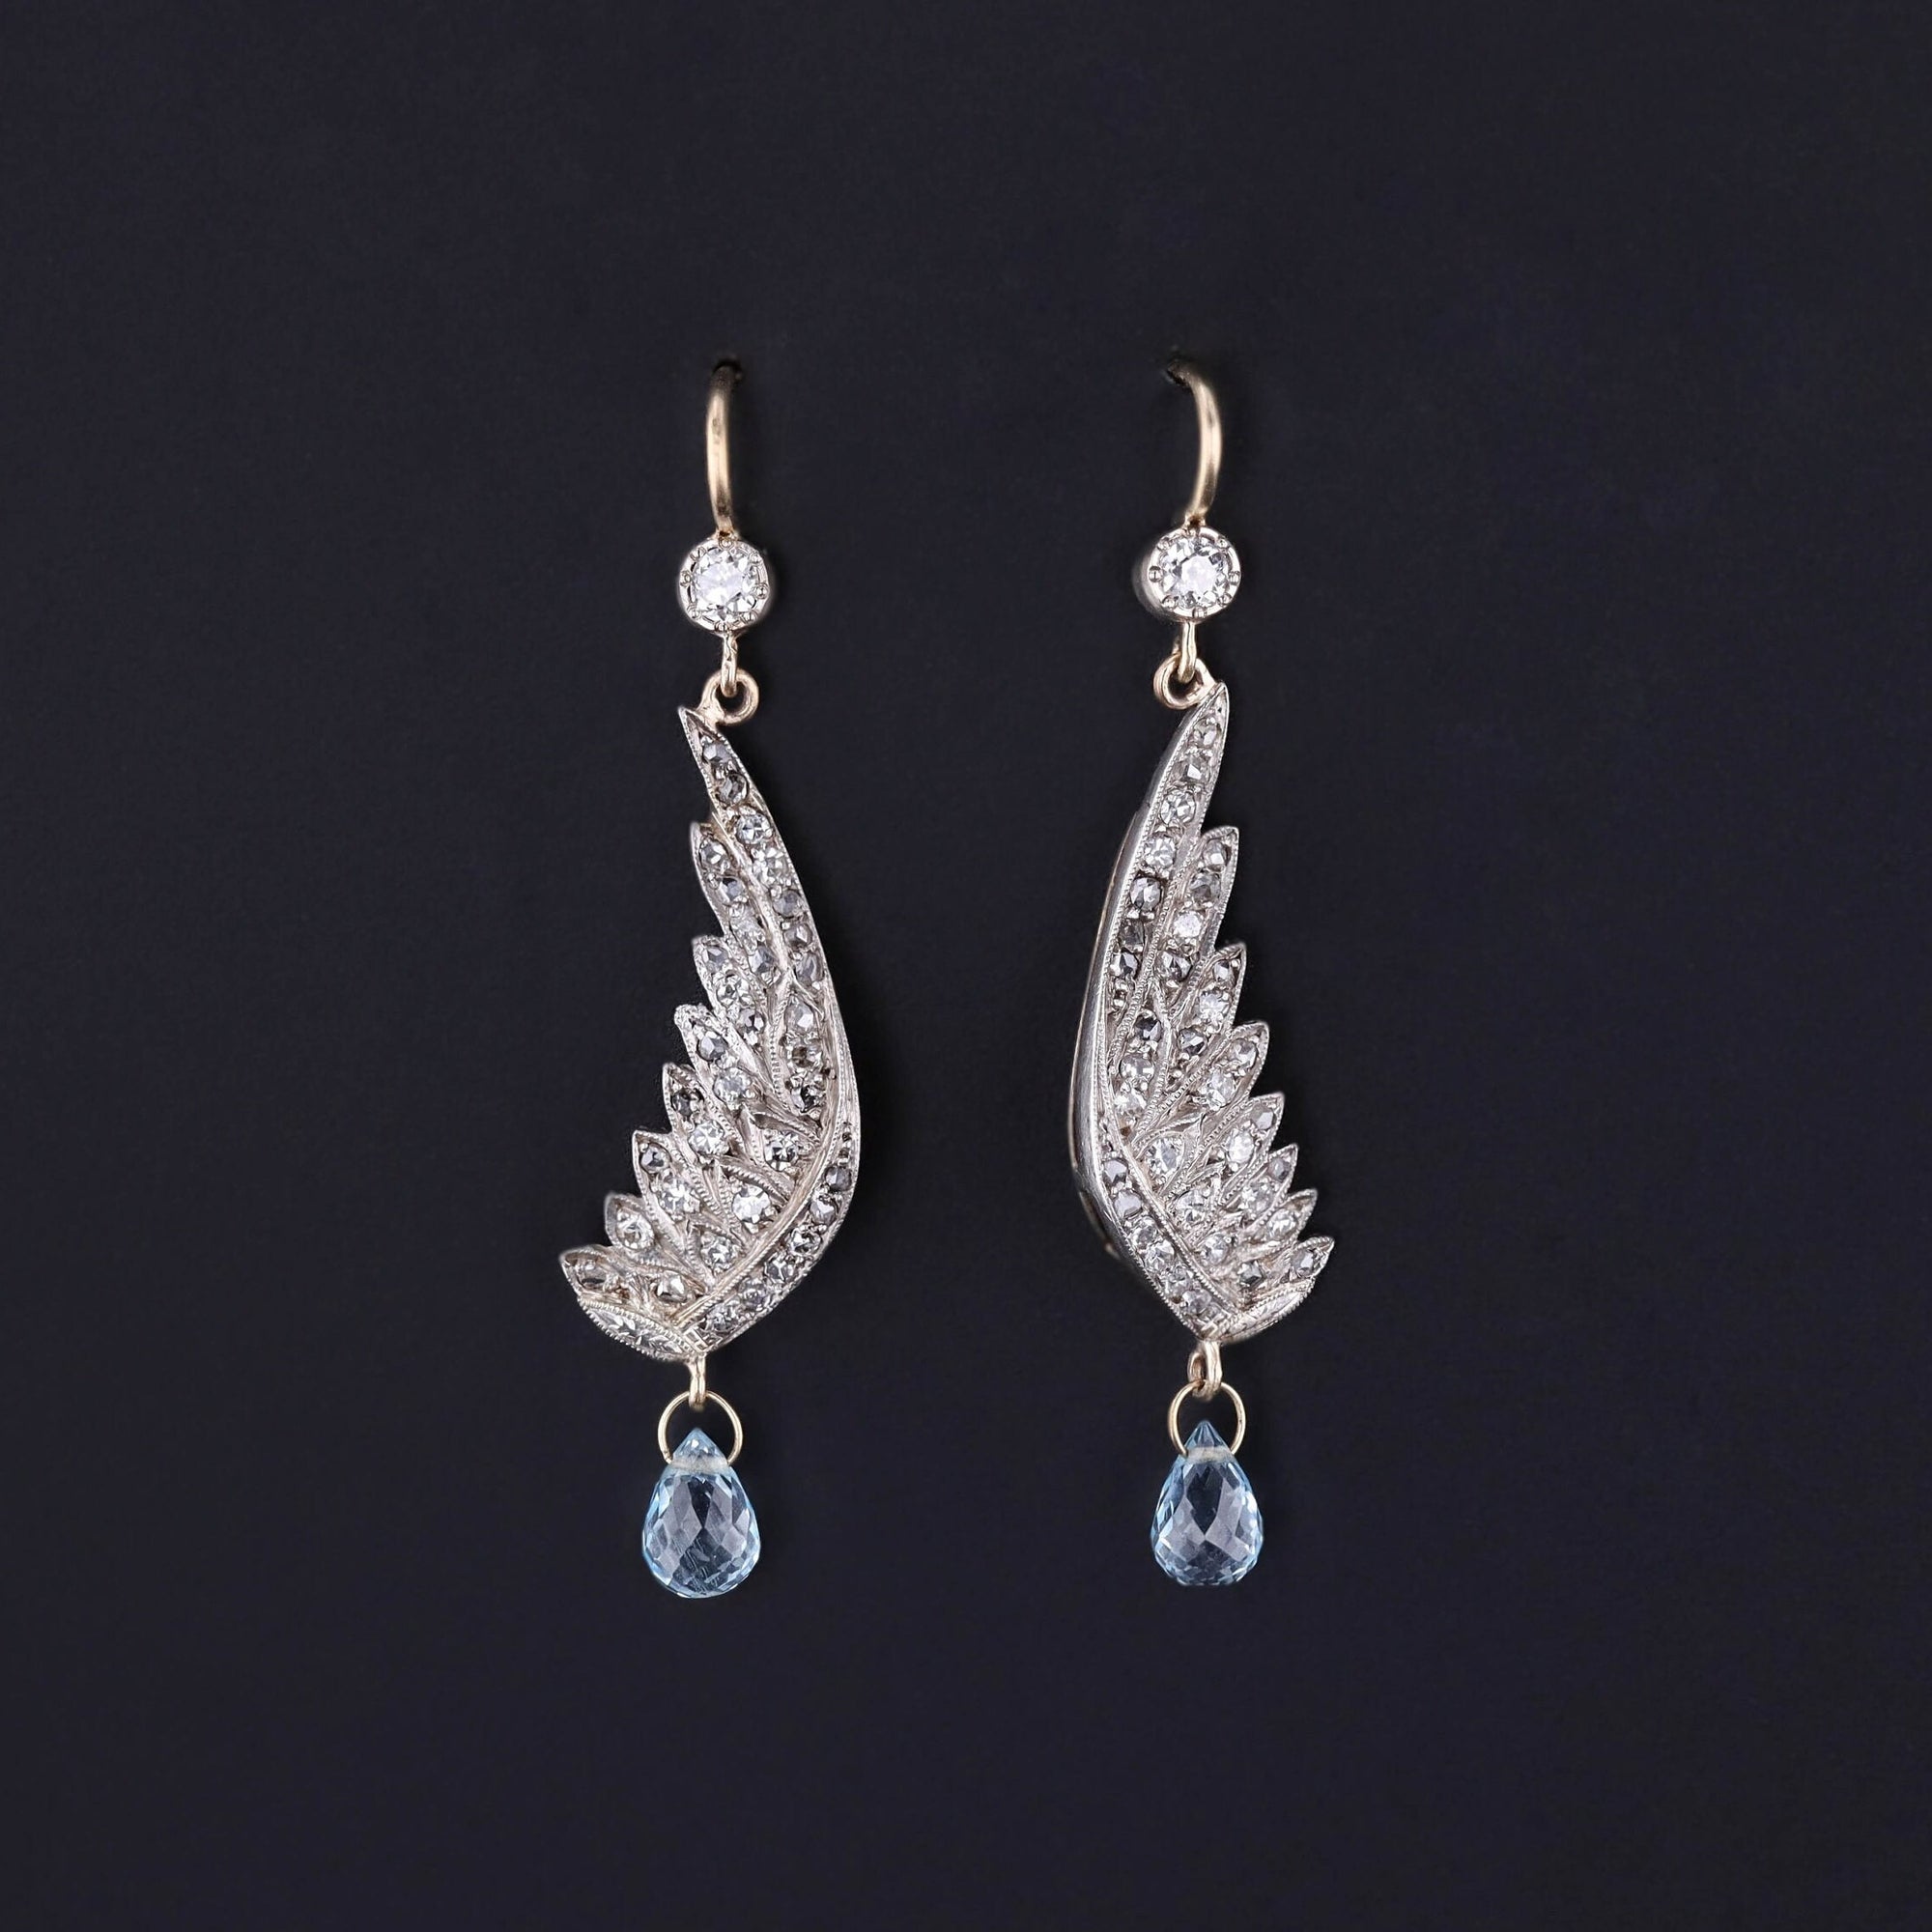 Dangle earrings featuring wings of 18k white gold and diamonds with blue topaz drops